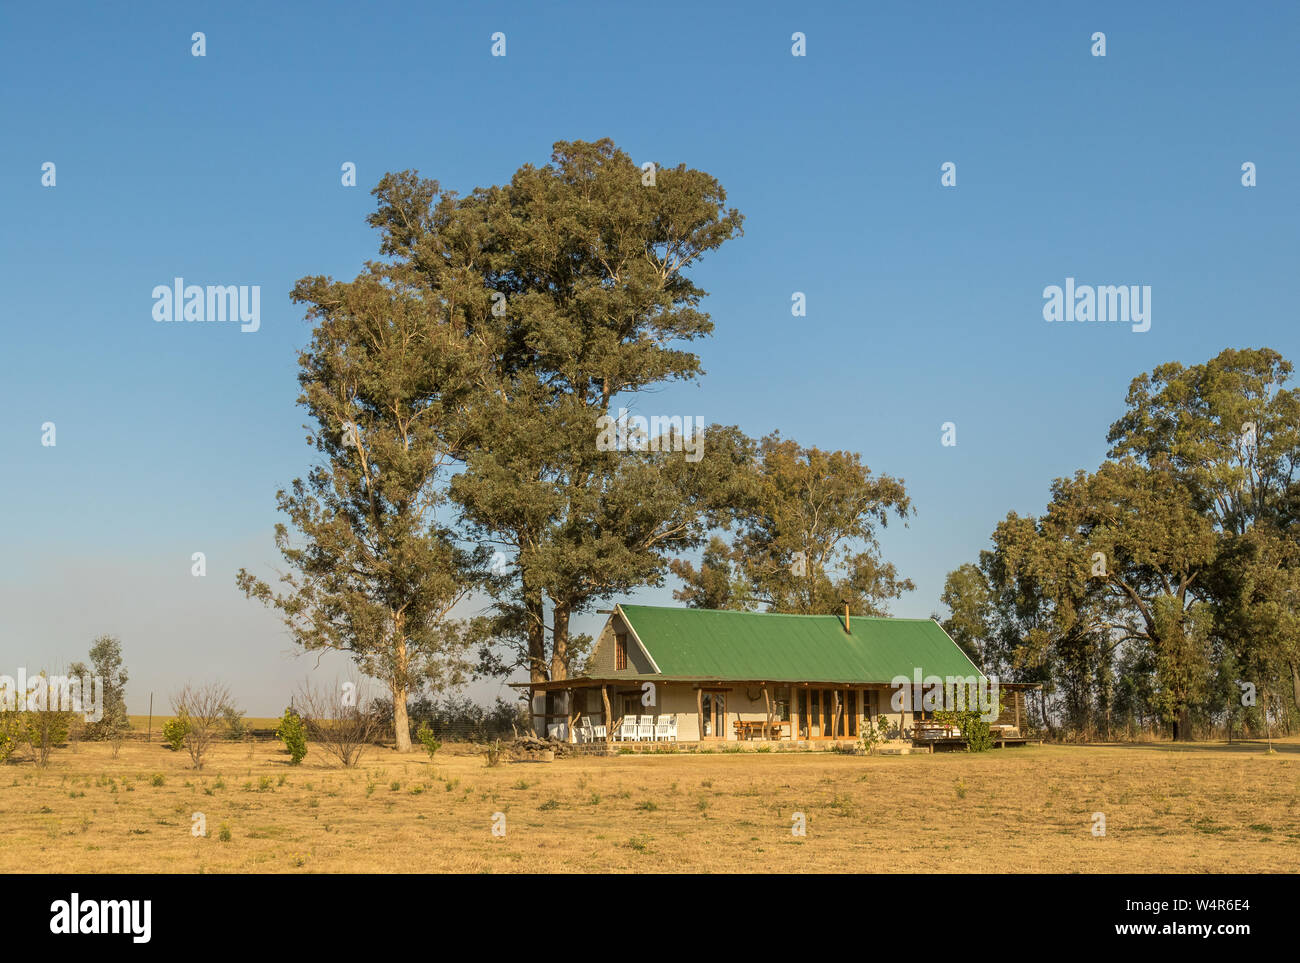 Bergville, South Africa - An accommodation unit at the Dalmore Guest Farm in the KwaZulu-Natal Midlands image in landscape format Stock Photo